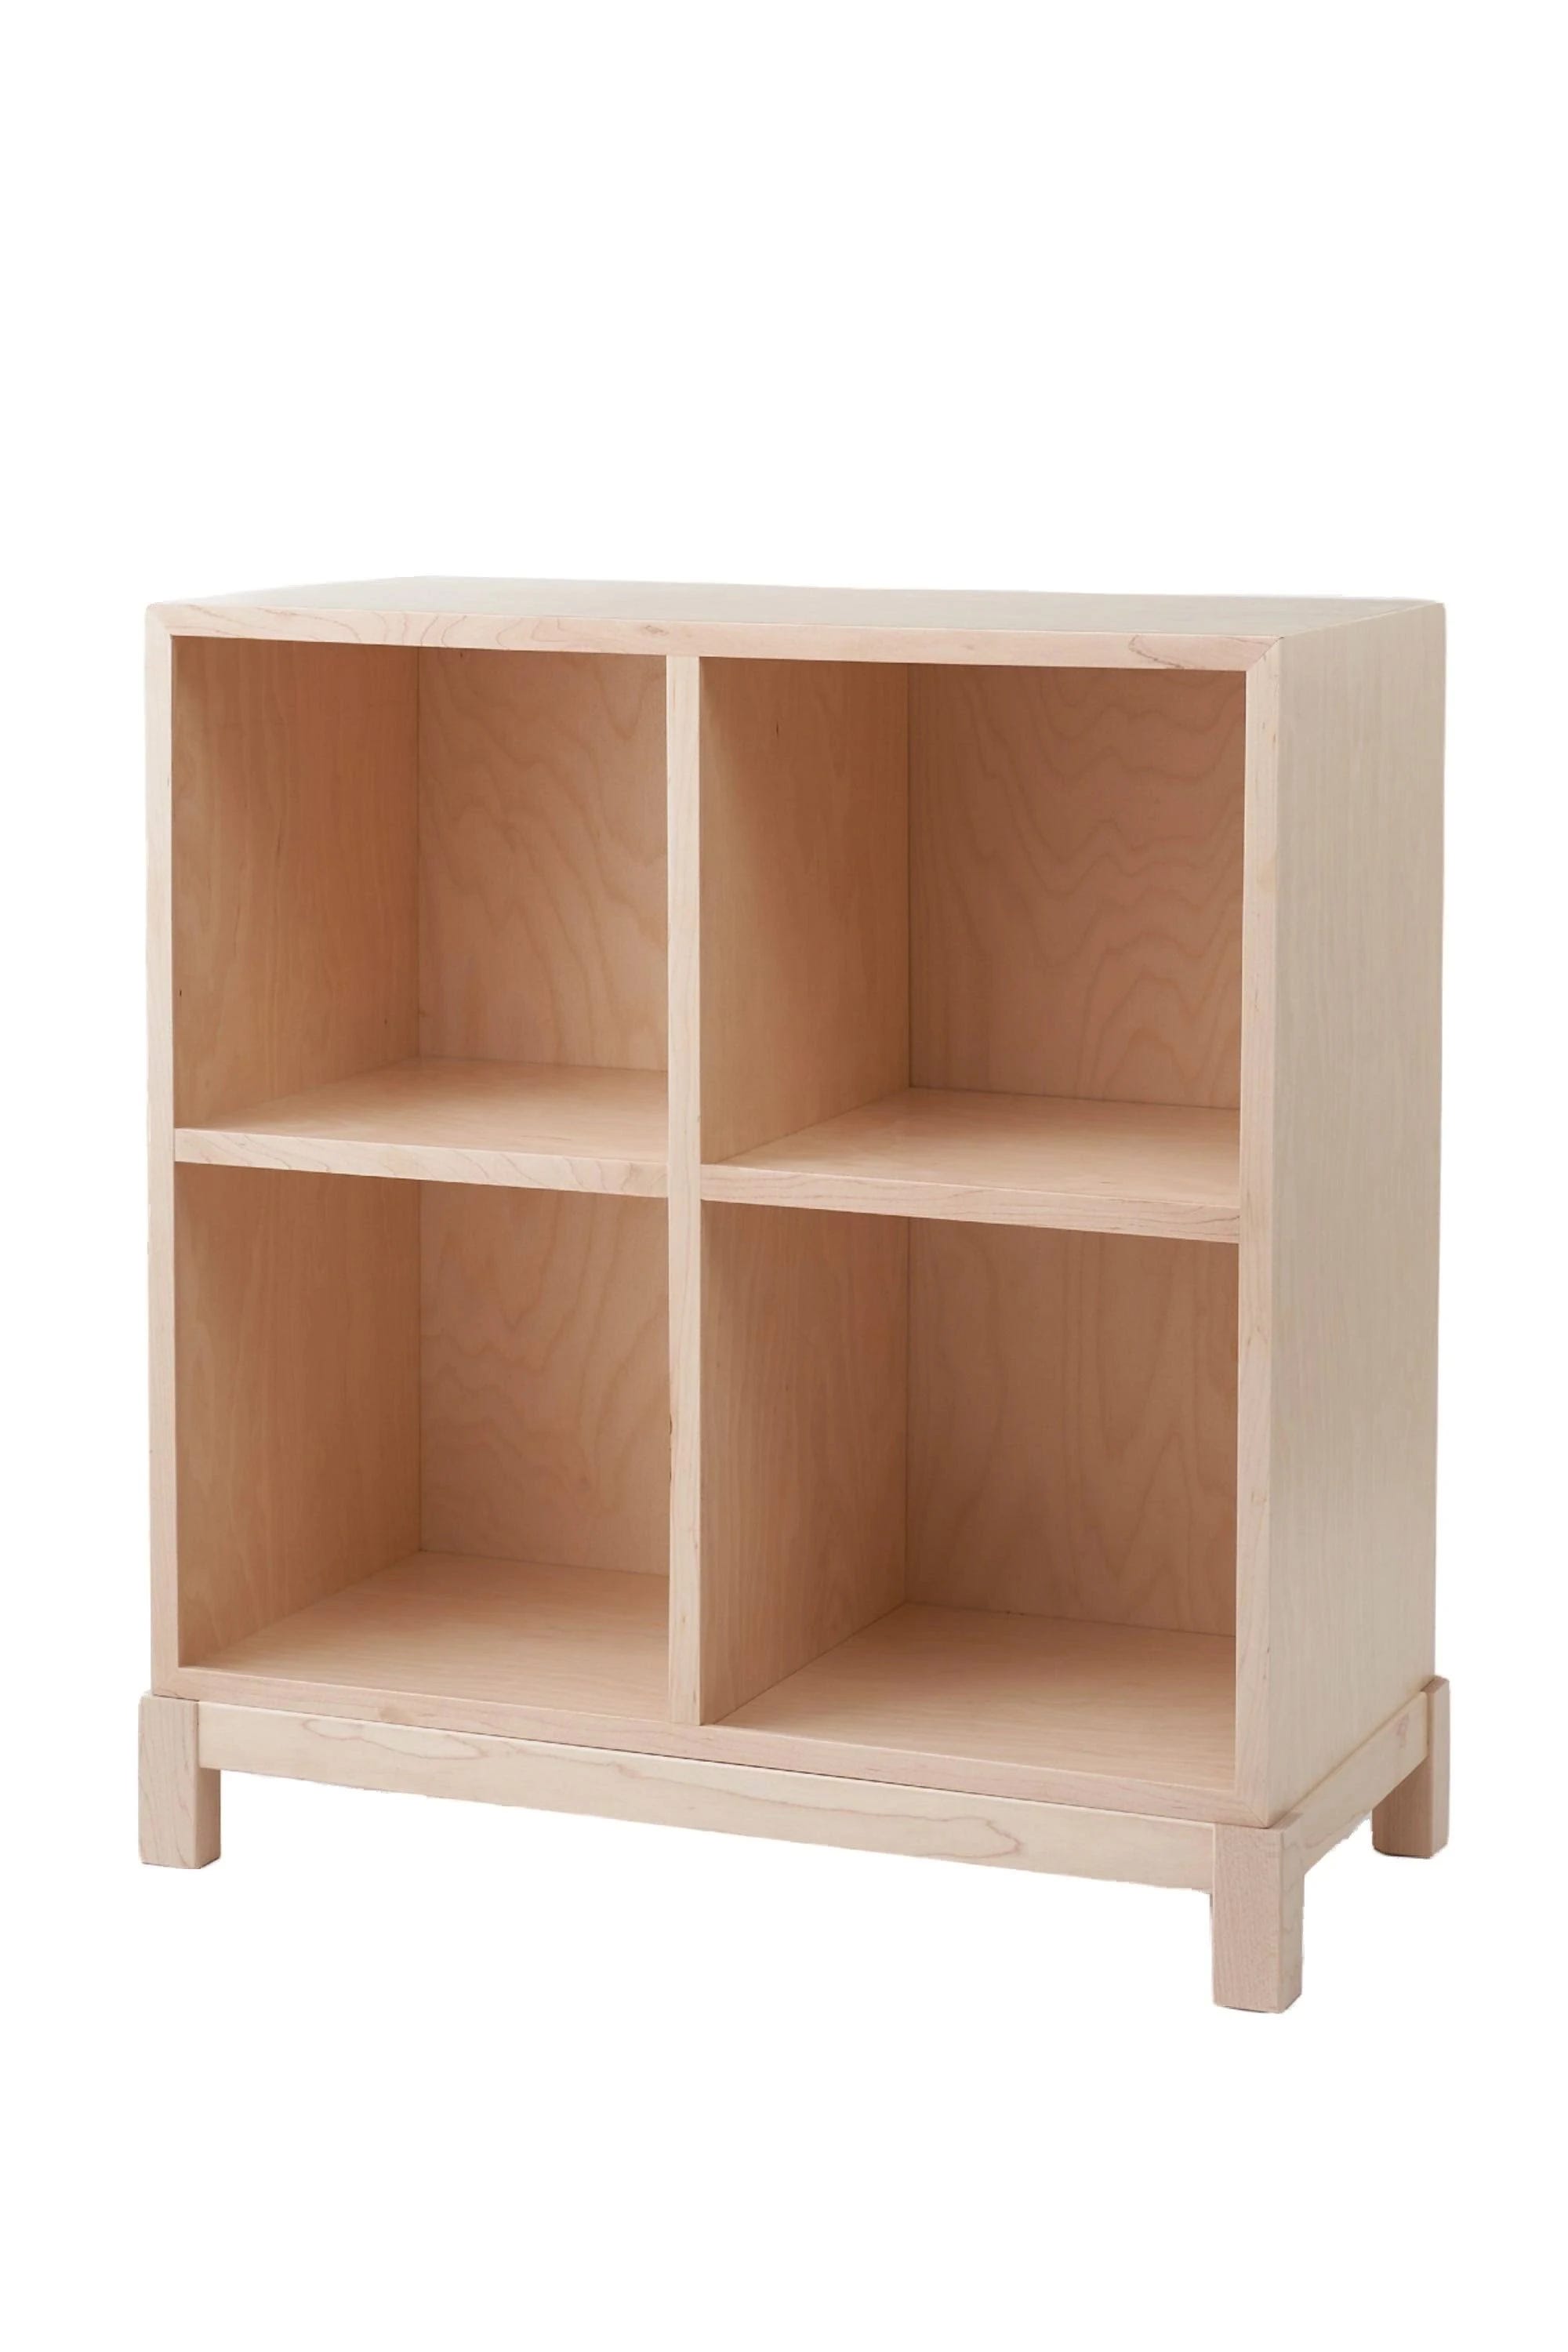 Modern Nursery Shelves with Handcrafted Solid Maple Base and Non-Toxic Finishes | Image